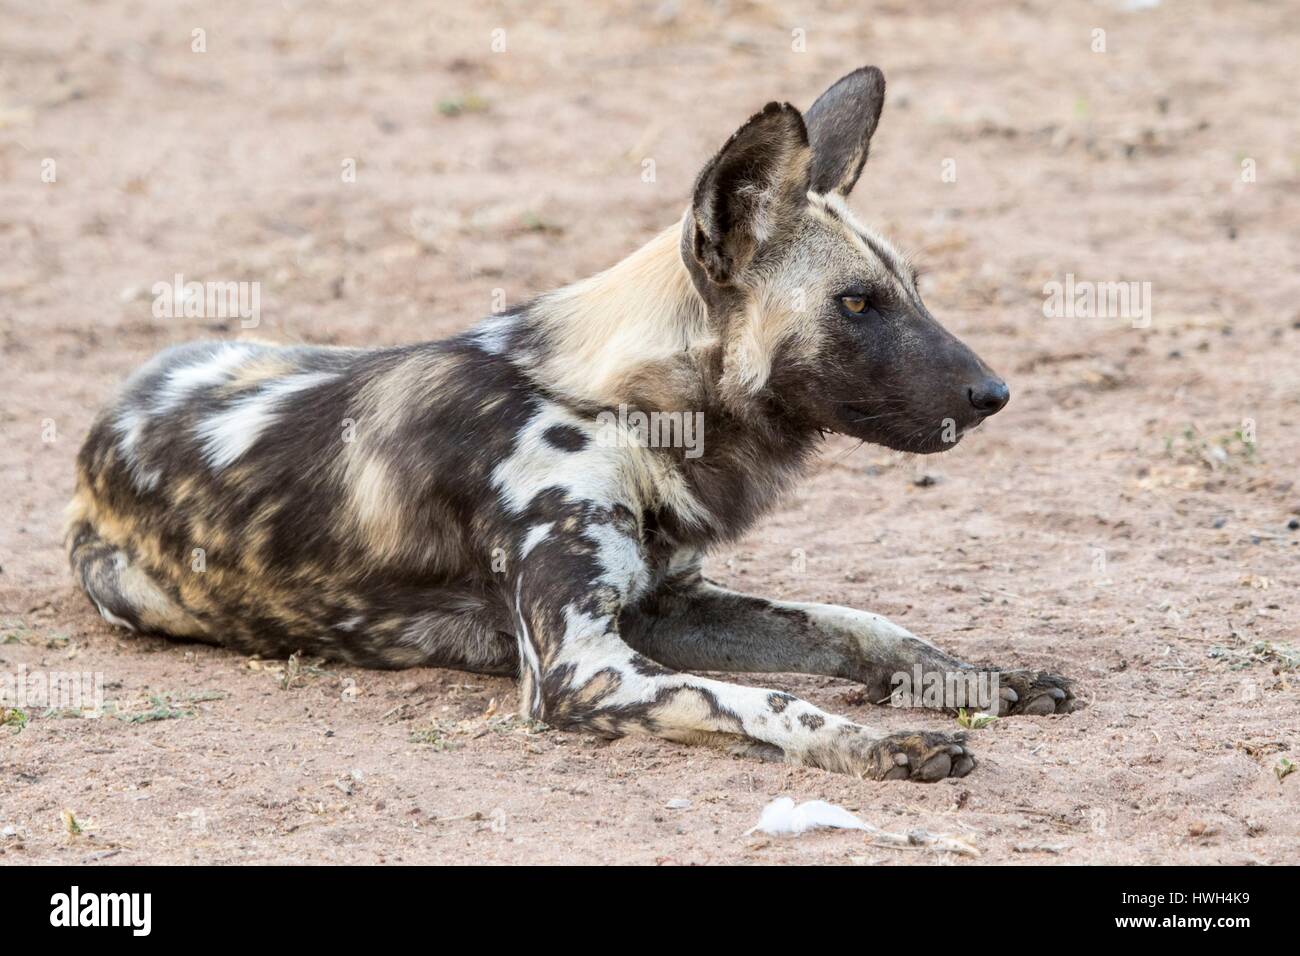 South Africa, Sabi Sands game reserve, wild dog (Lycaon pictus) Stock Photo